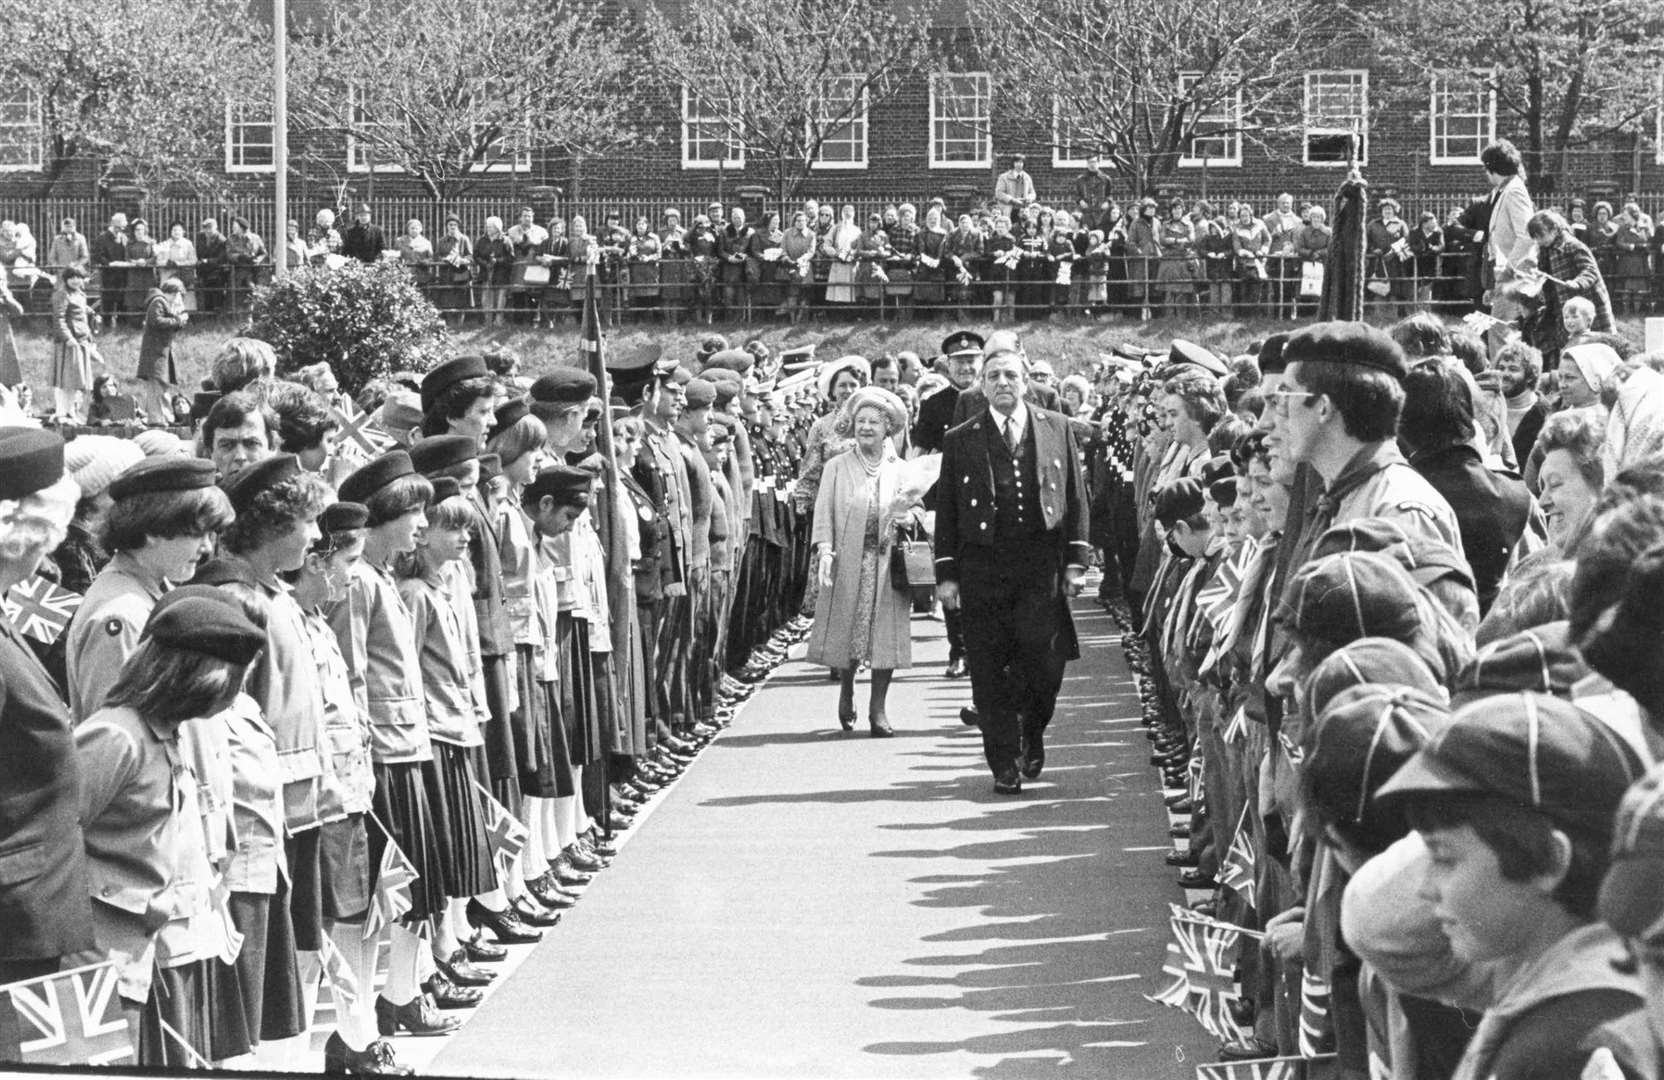 Guides and cubs were among the thousands of people who welcomed the Queen Mother to Chatham in May 1979 for the official opening of the £8.5 million administrative headquarters of Lloyds of London in Dock Road, Chatham